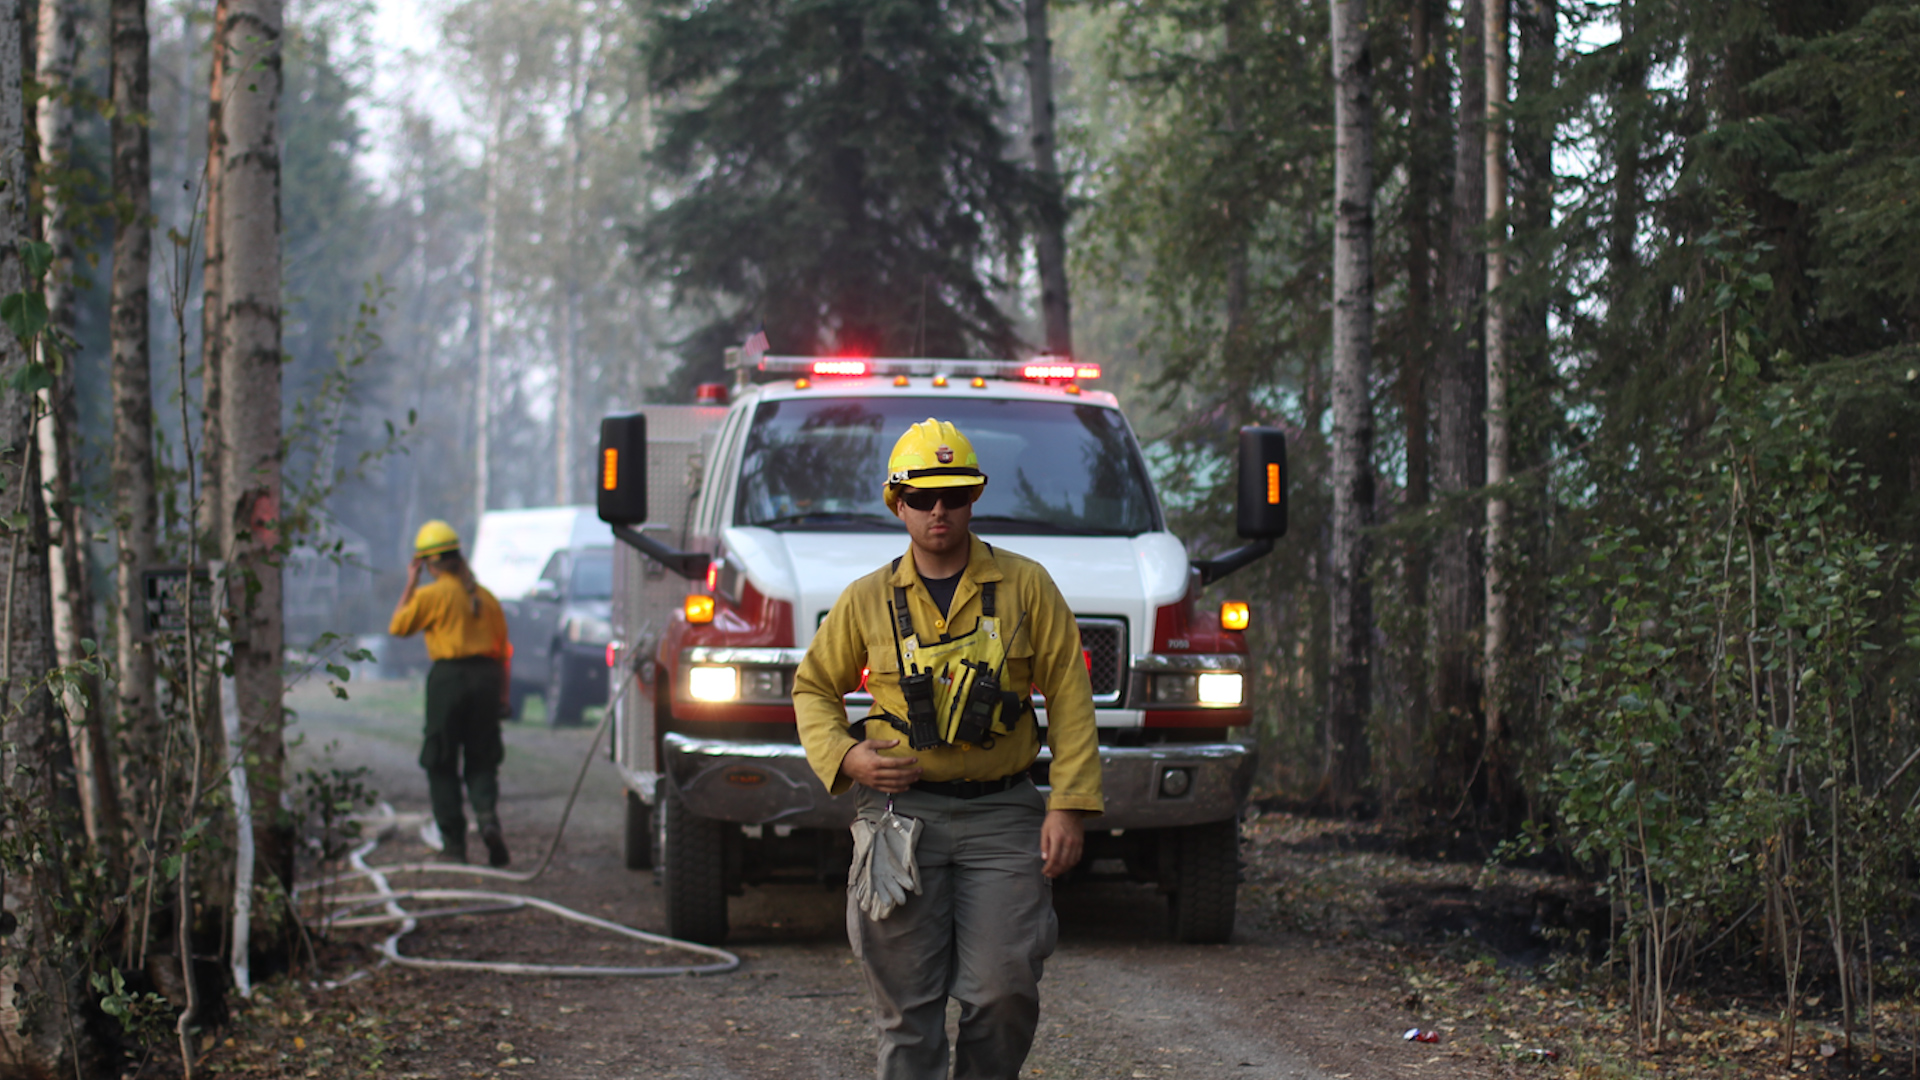 Researchers and city officials work to inform Hillside communities of wildfire risks